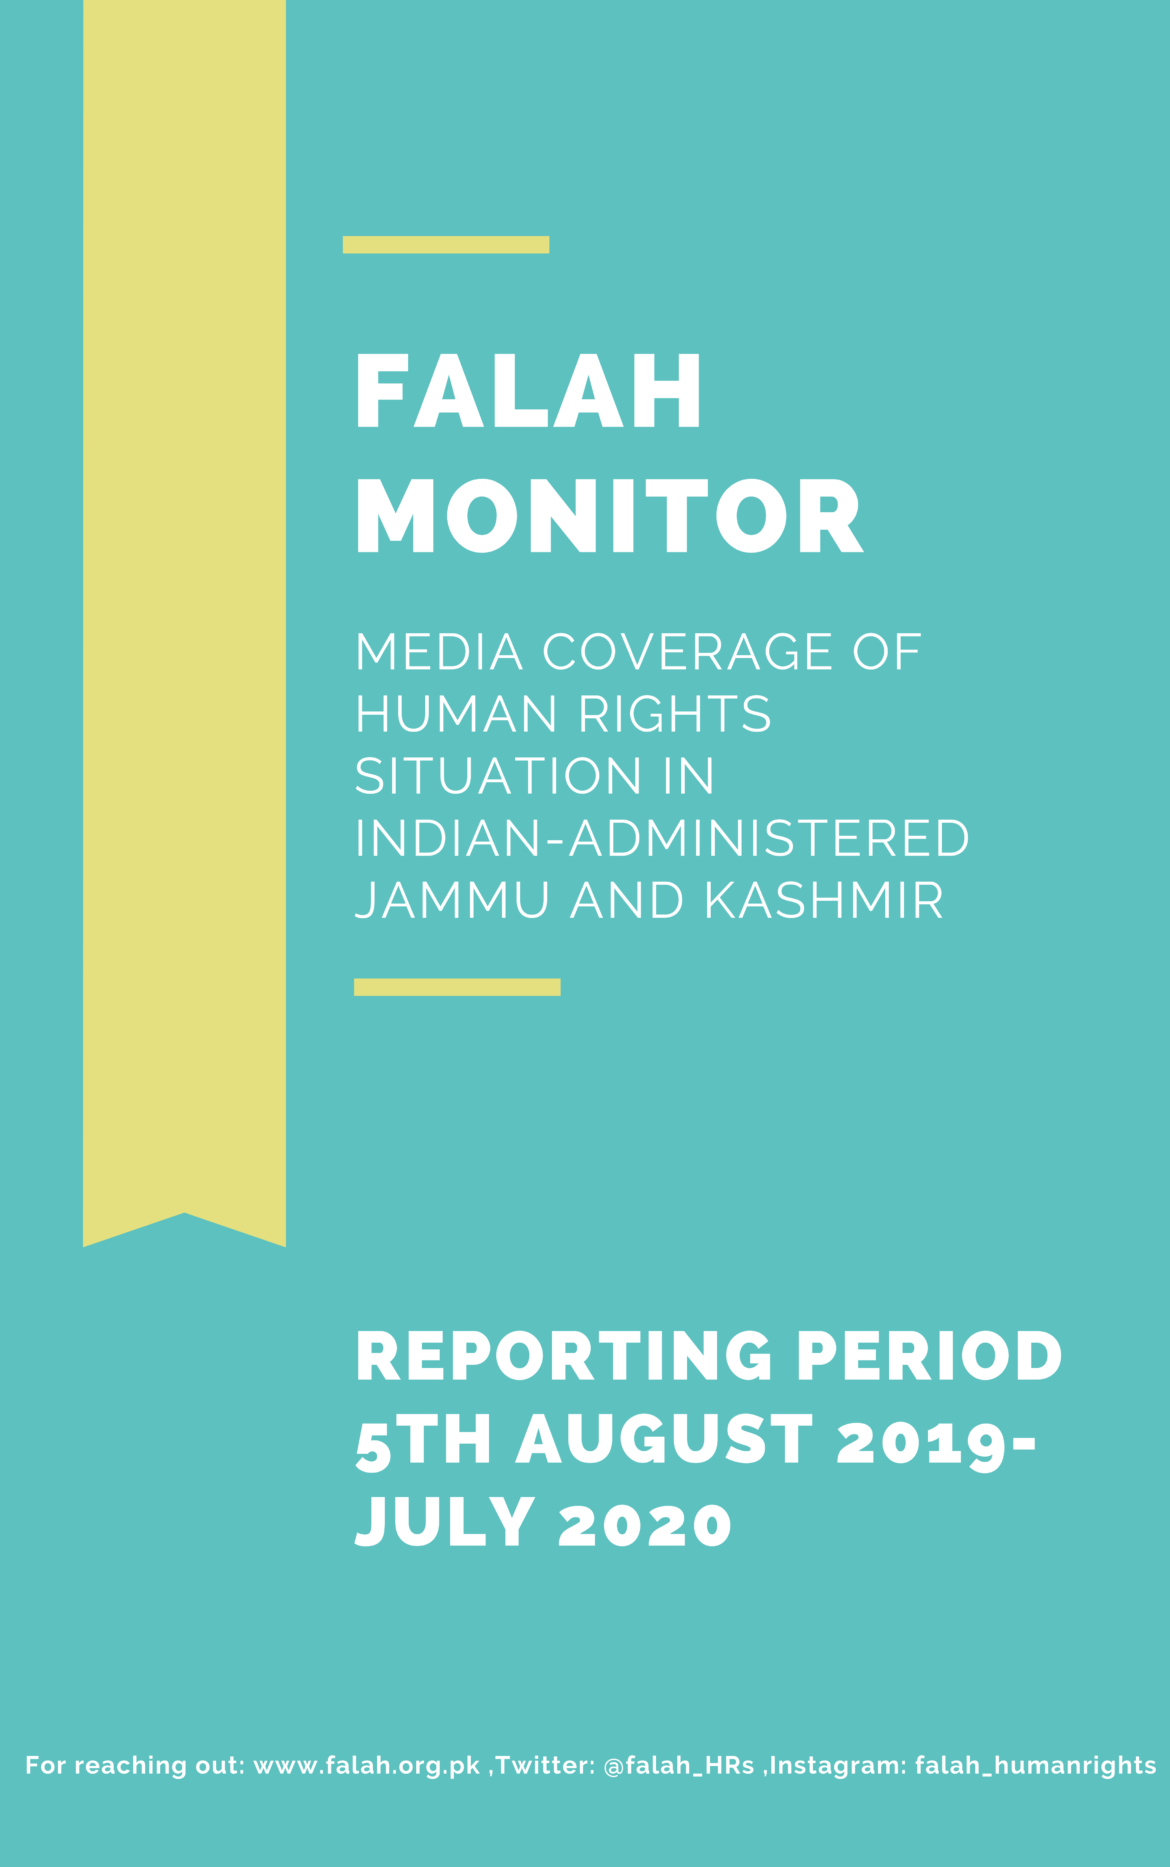 ‘FALAH Monitor’ on human rights situation in the ‘Indian-Administered Jammu and Kashmir’ – Time period (5 August 2019 – July 2020)